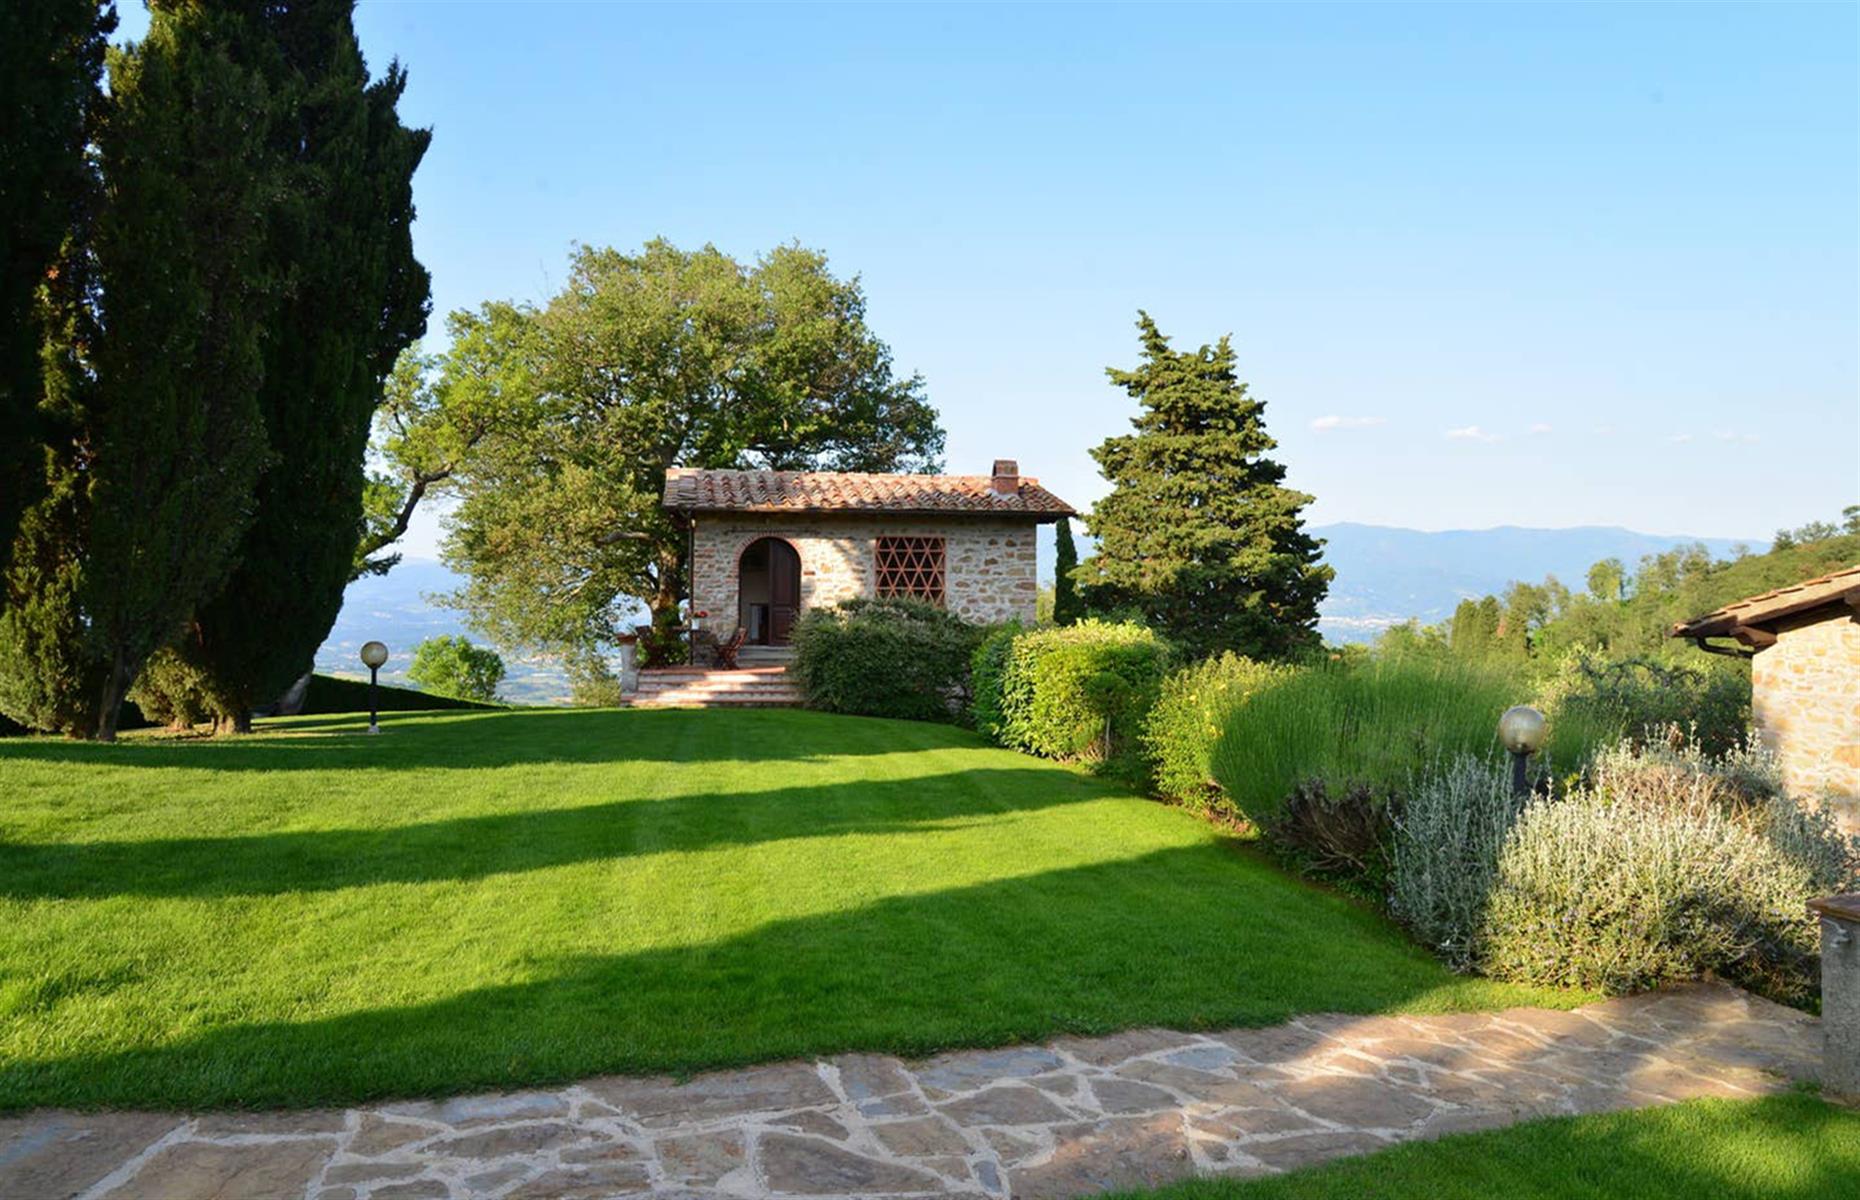 <p>Located on picturesque farmhouse grounds in the Chianti hills, 12 miles (20km) from Florence, <a href="https://www.airbnb.co.uk/rooms/4081775">this quaint restored hayloft</a> has two bedrooms, a kitchen and a living area. Situated in a typical Tuscan agriturismo (B&B on a farm), this charming Airbnb is surrounded by cypress trees and offers sweeping views of the area. There's also a swimming pool and a private garden surrounded by towering oak trees.</p>